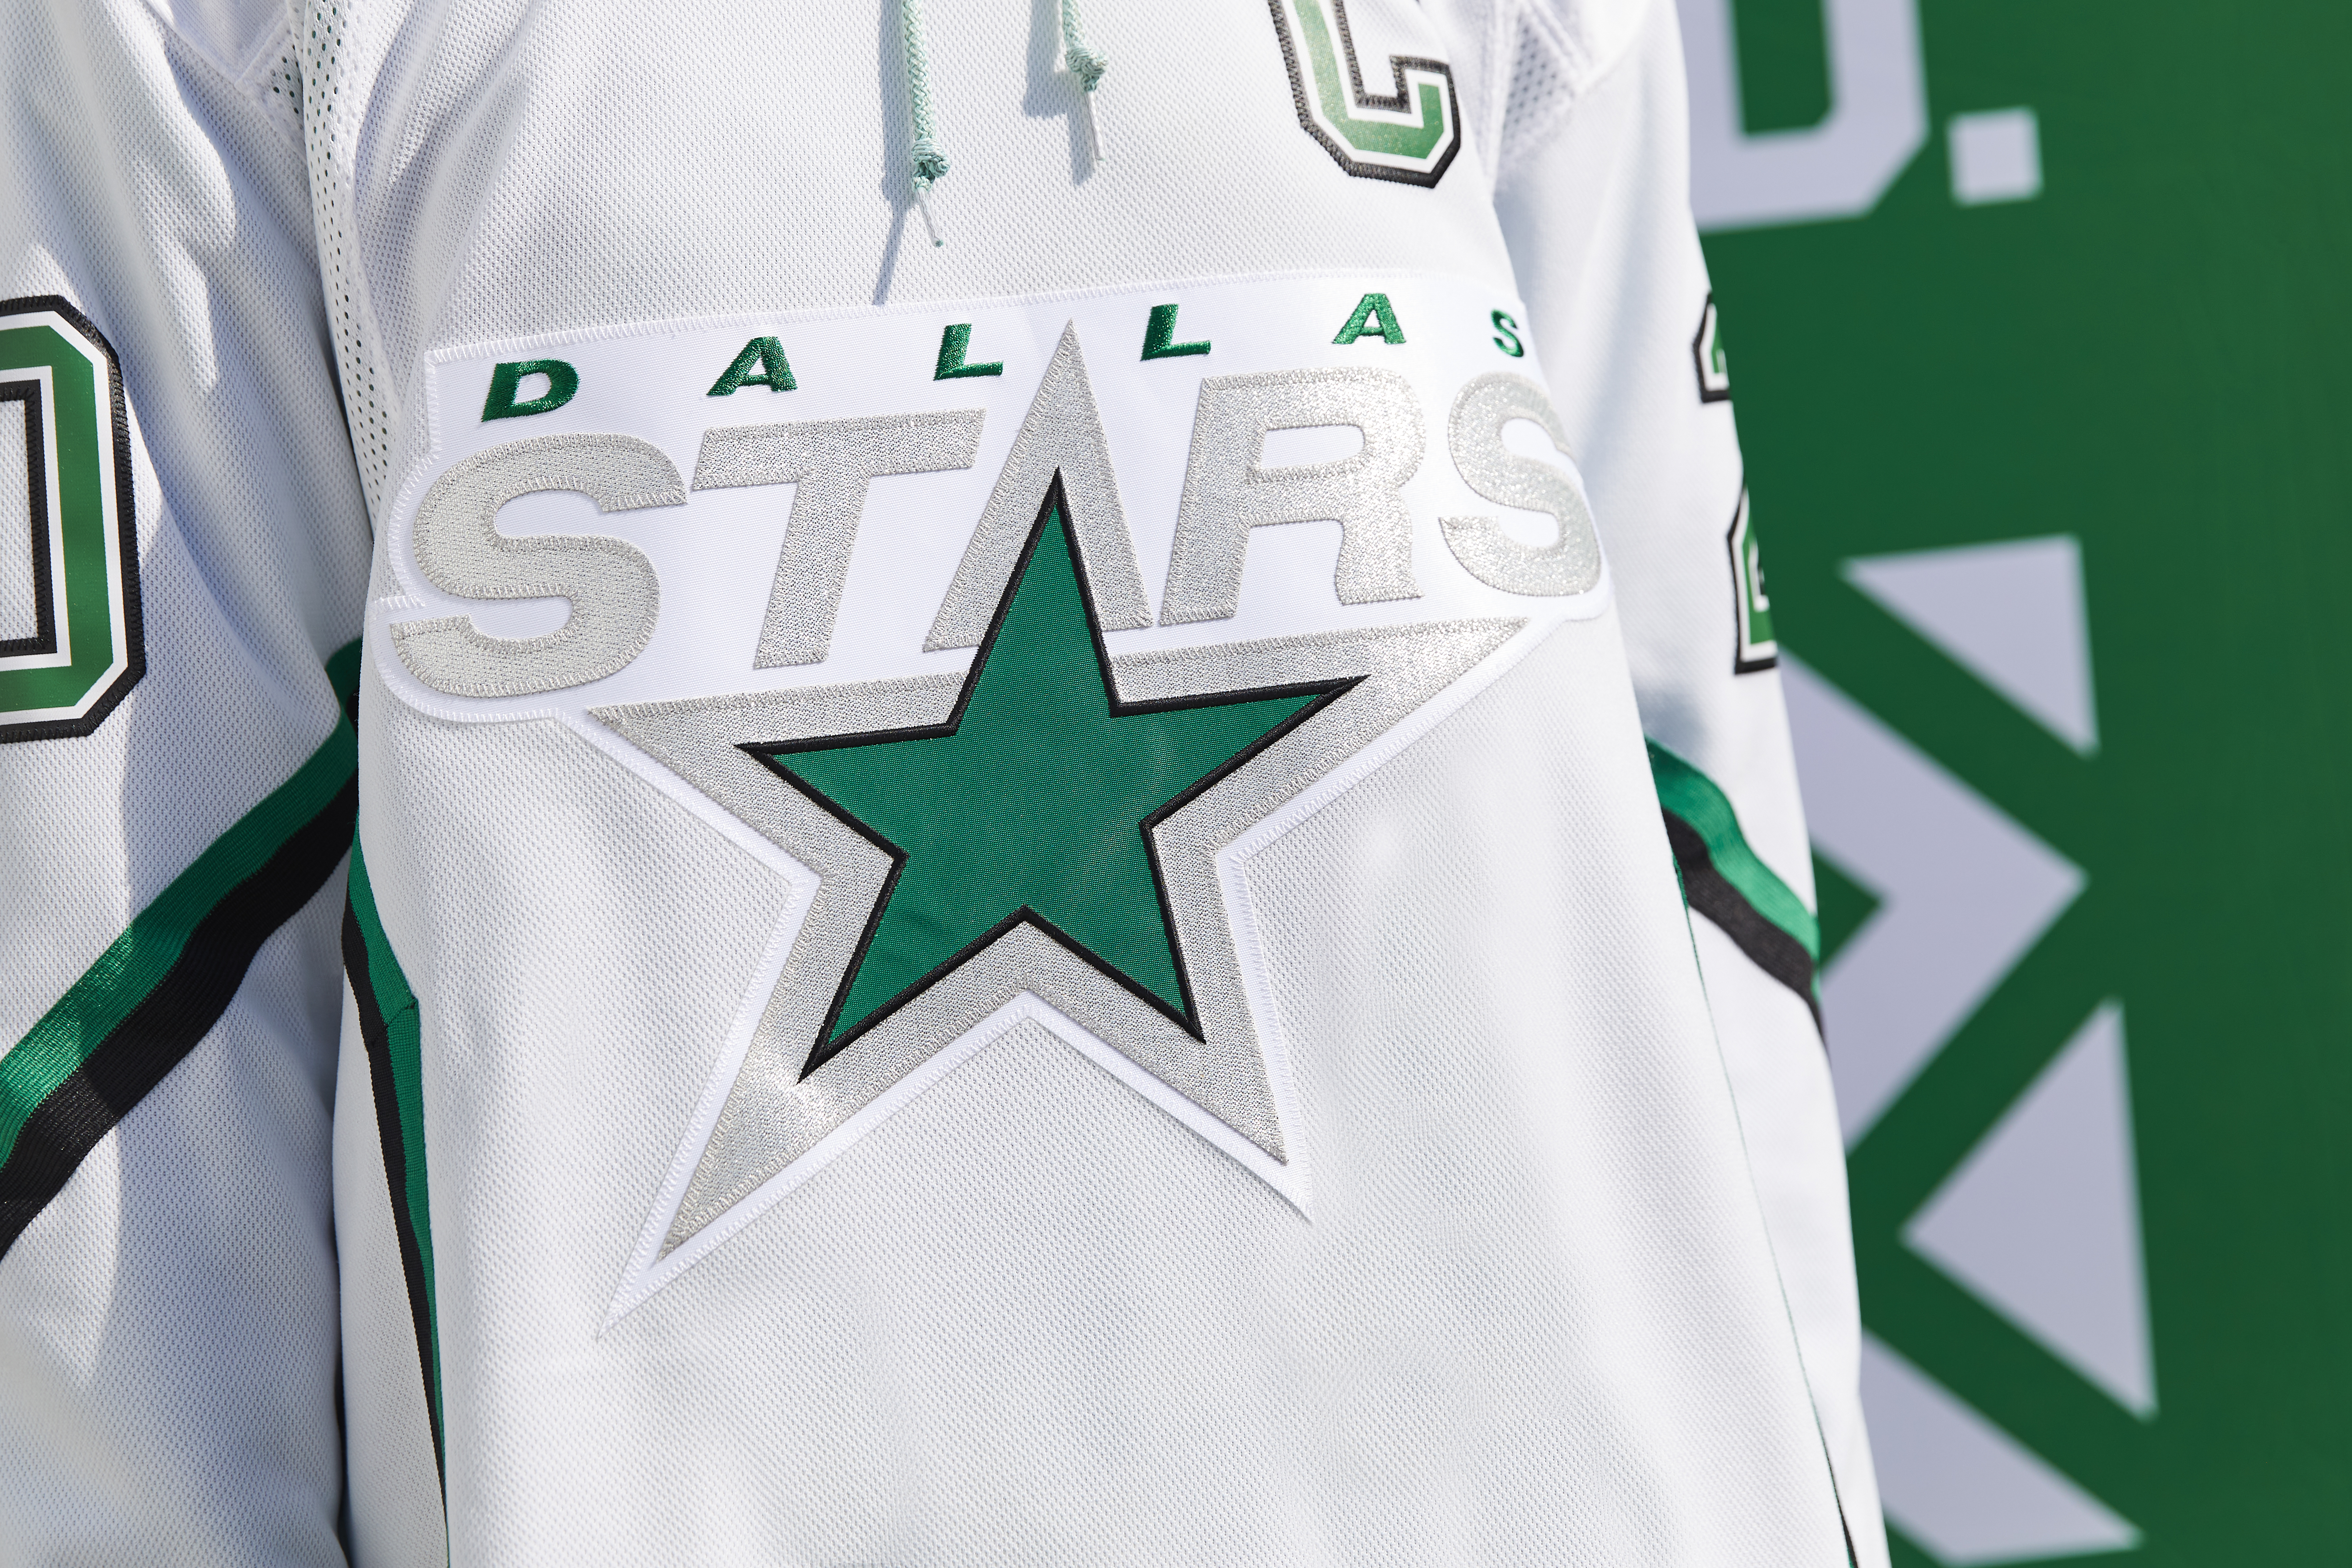 NHL Releases 2020 All-Star Game Jerseys